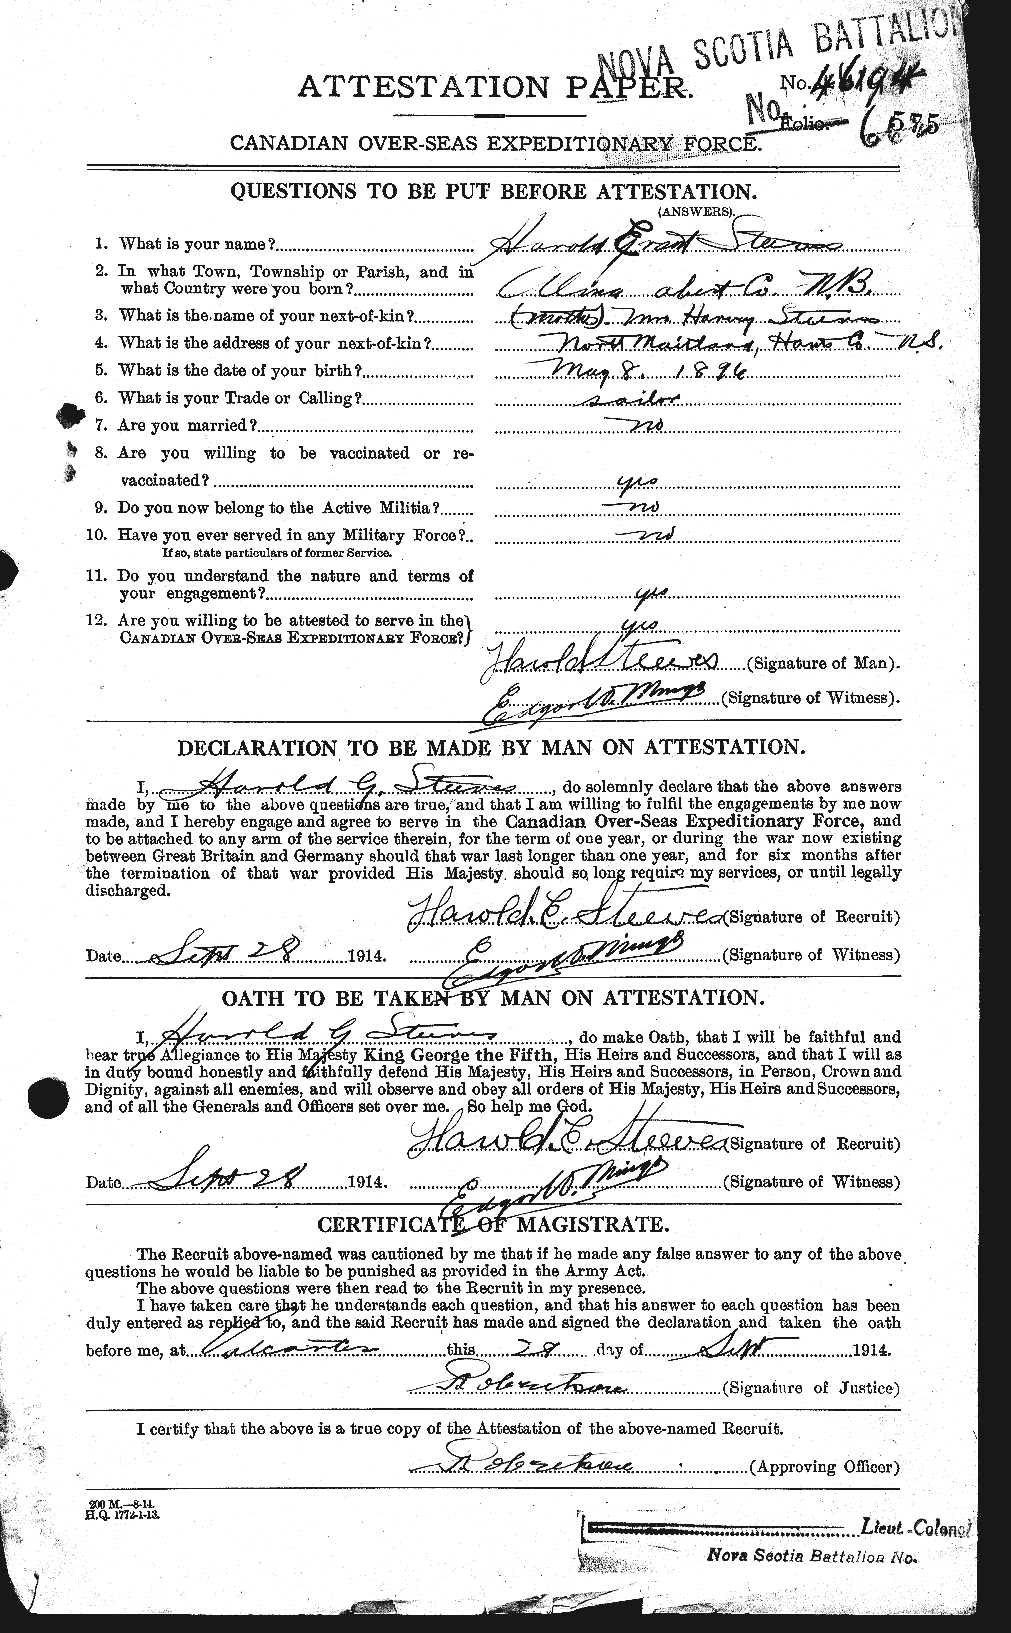 Personnel Records of the First World War - CEF 119436a